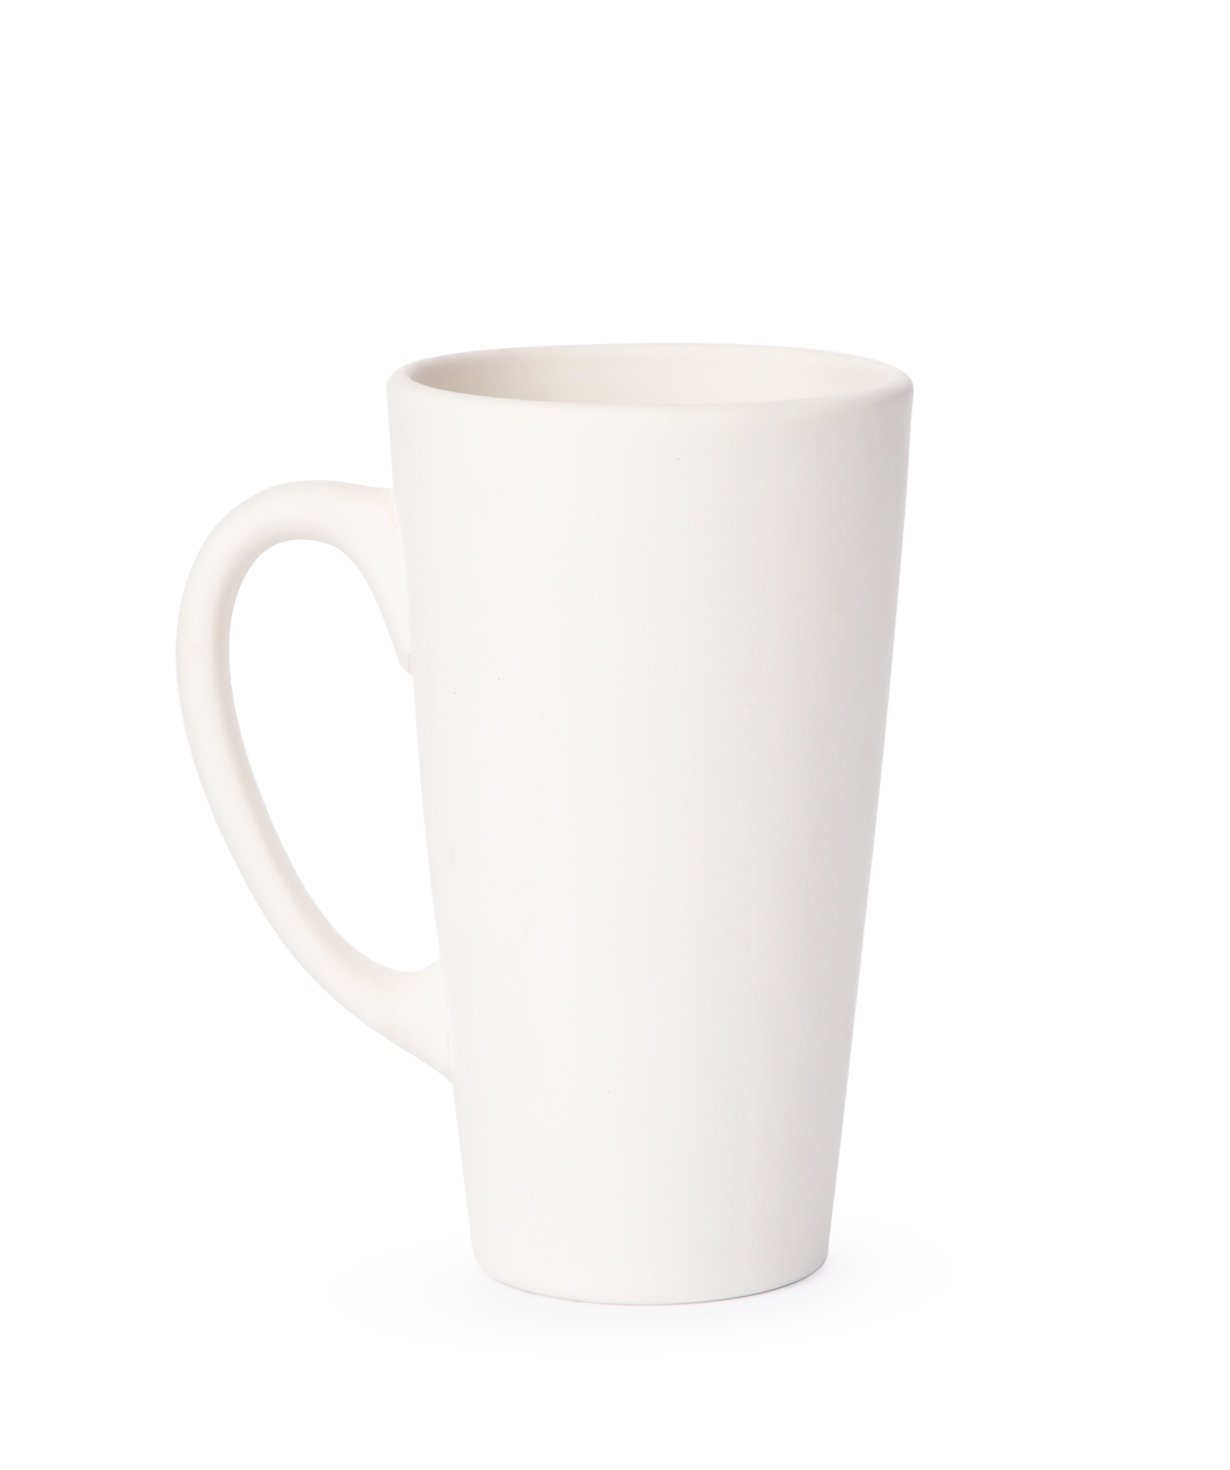 Collection `Yes Republic` art, tall flare mug